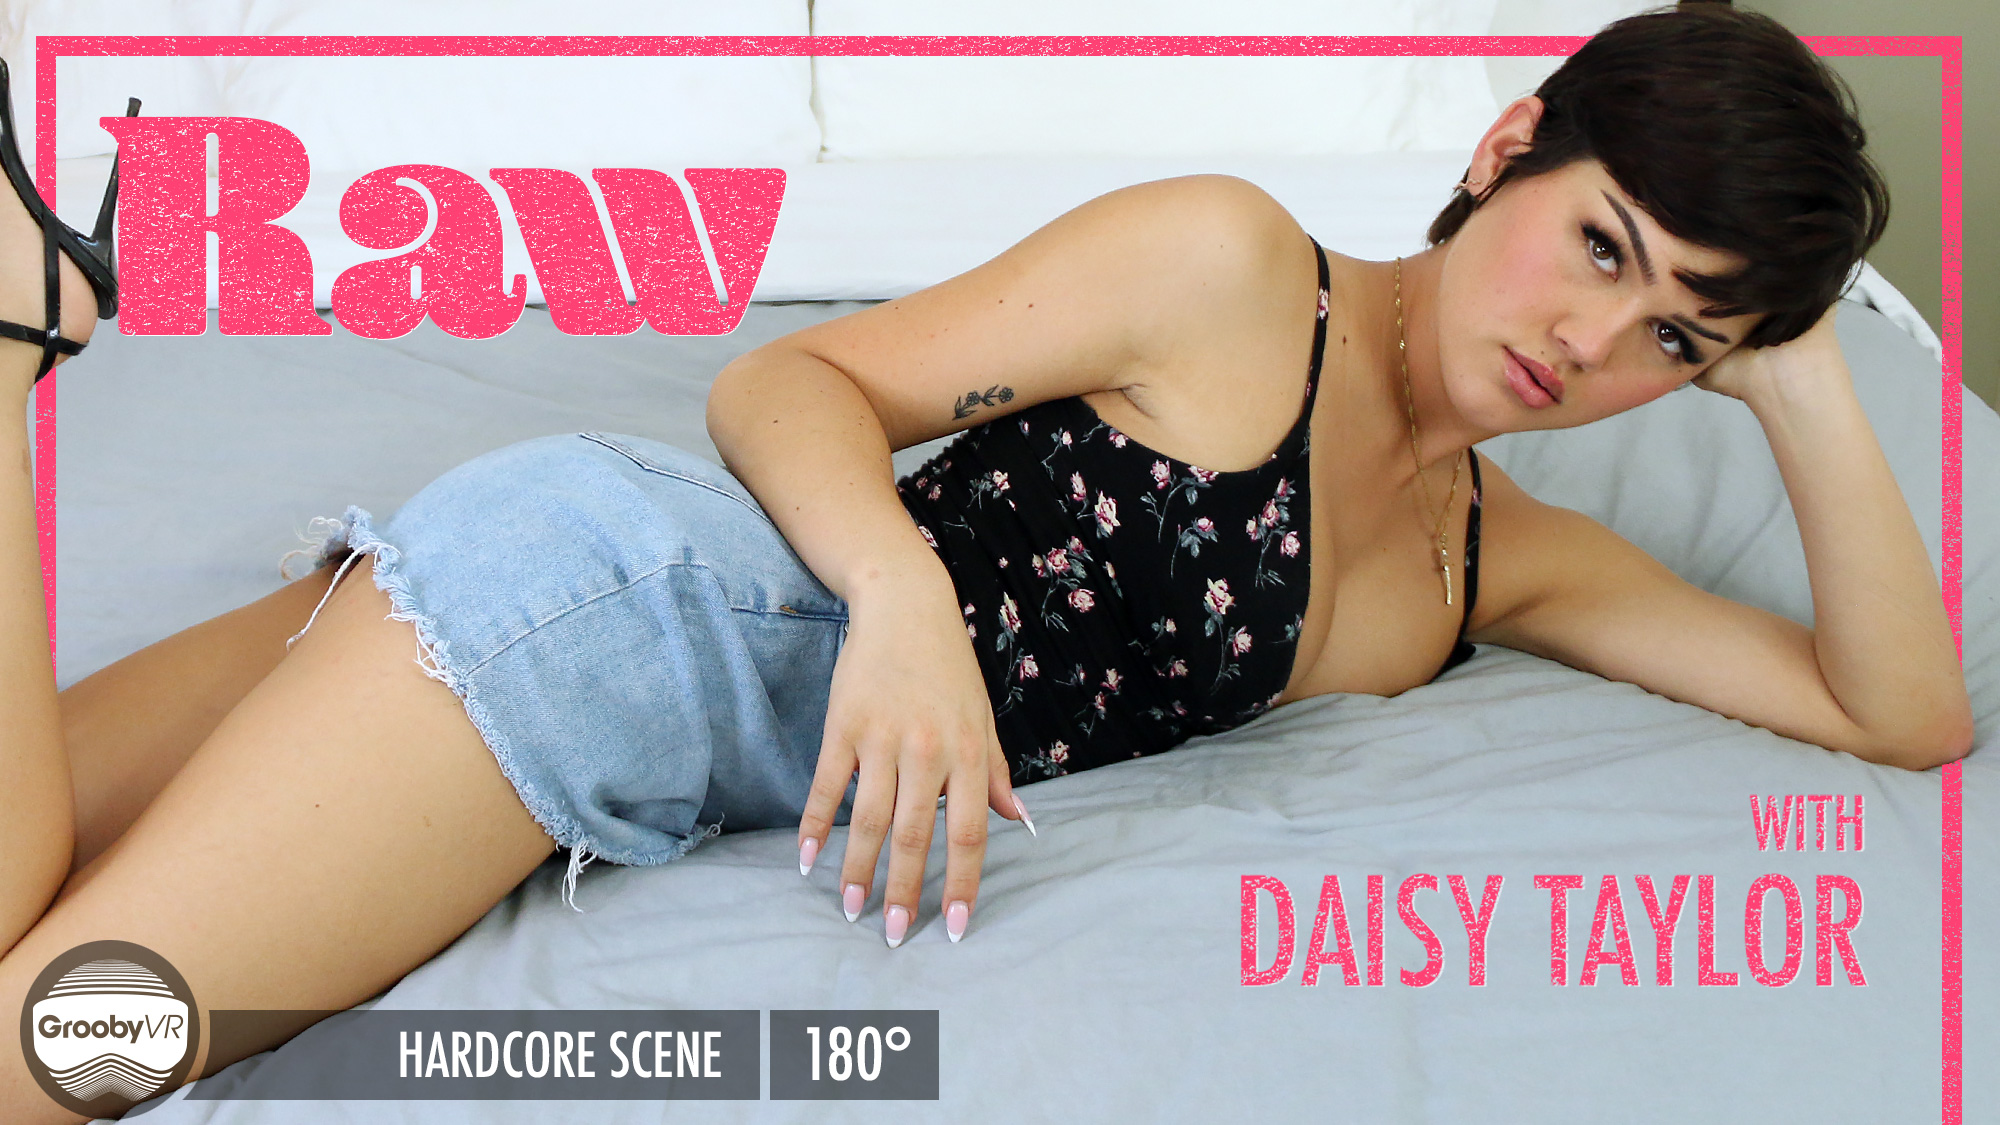 Daisy taylor couch